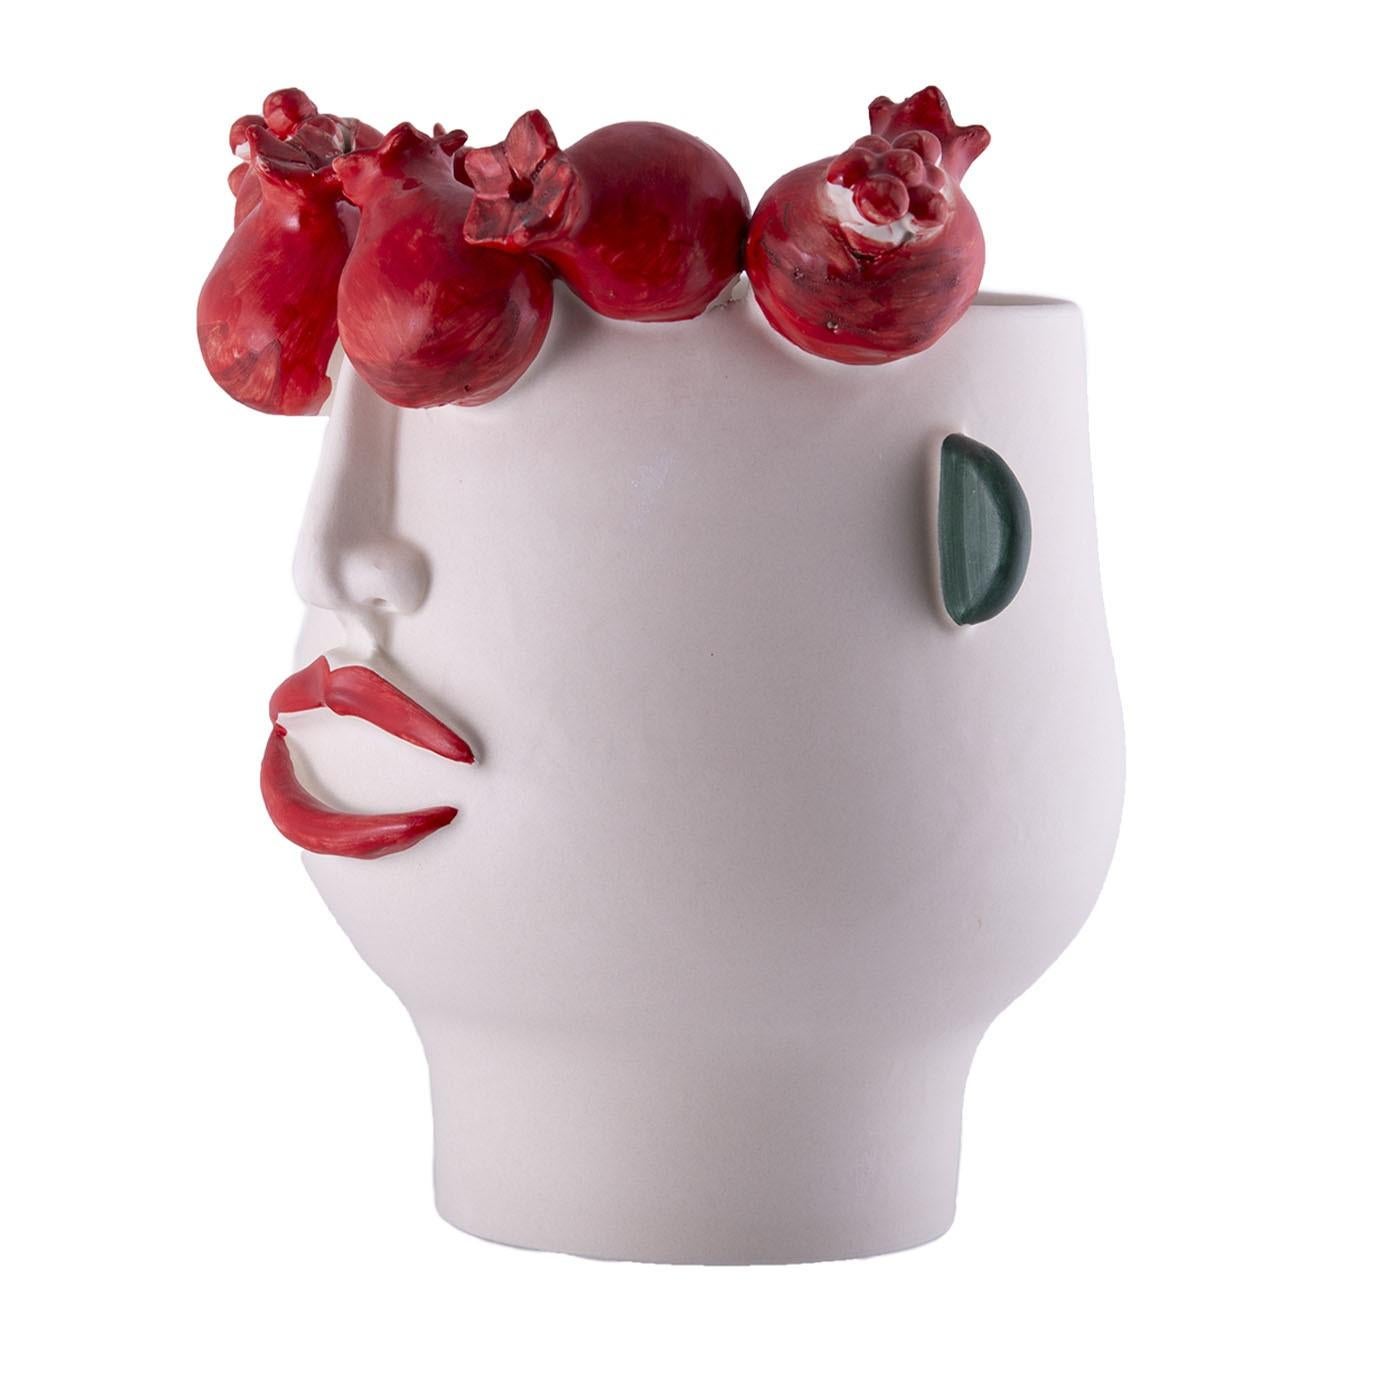 Testament to the Sicilian tradition of Moor's head reinterpreted in a stylish contemporary key, this ceramic head can be used as a flower pot or decorative sculpture for indoor and outdoor settings of any style inspiration. Adorned with a wreath of